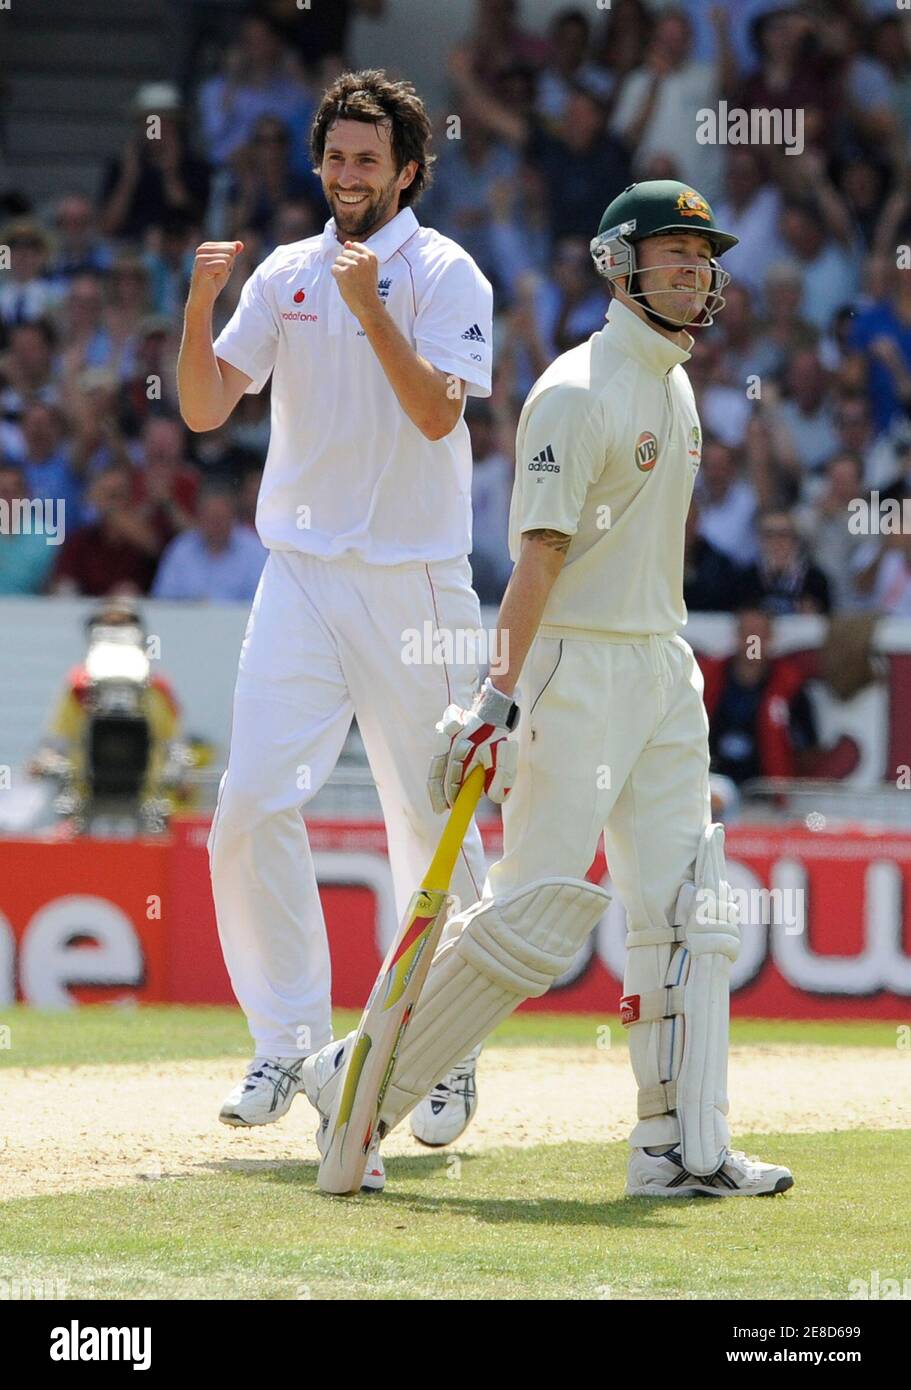 England's Graham Onions (L) celebrates taking the wicket of Australia's Michael Clarke during the second day of the fourth Ashes cricket test match at Headingley in Leeds, northern England August 8, 2009. REUTERS/Nigel Roddis (BRITAIN SPORT CRICKET) Stock Photo